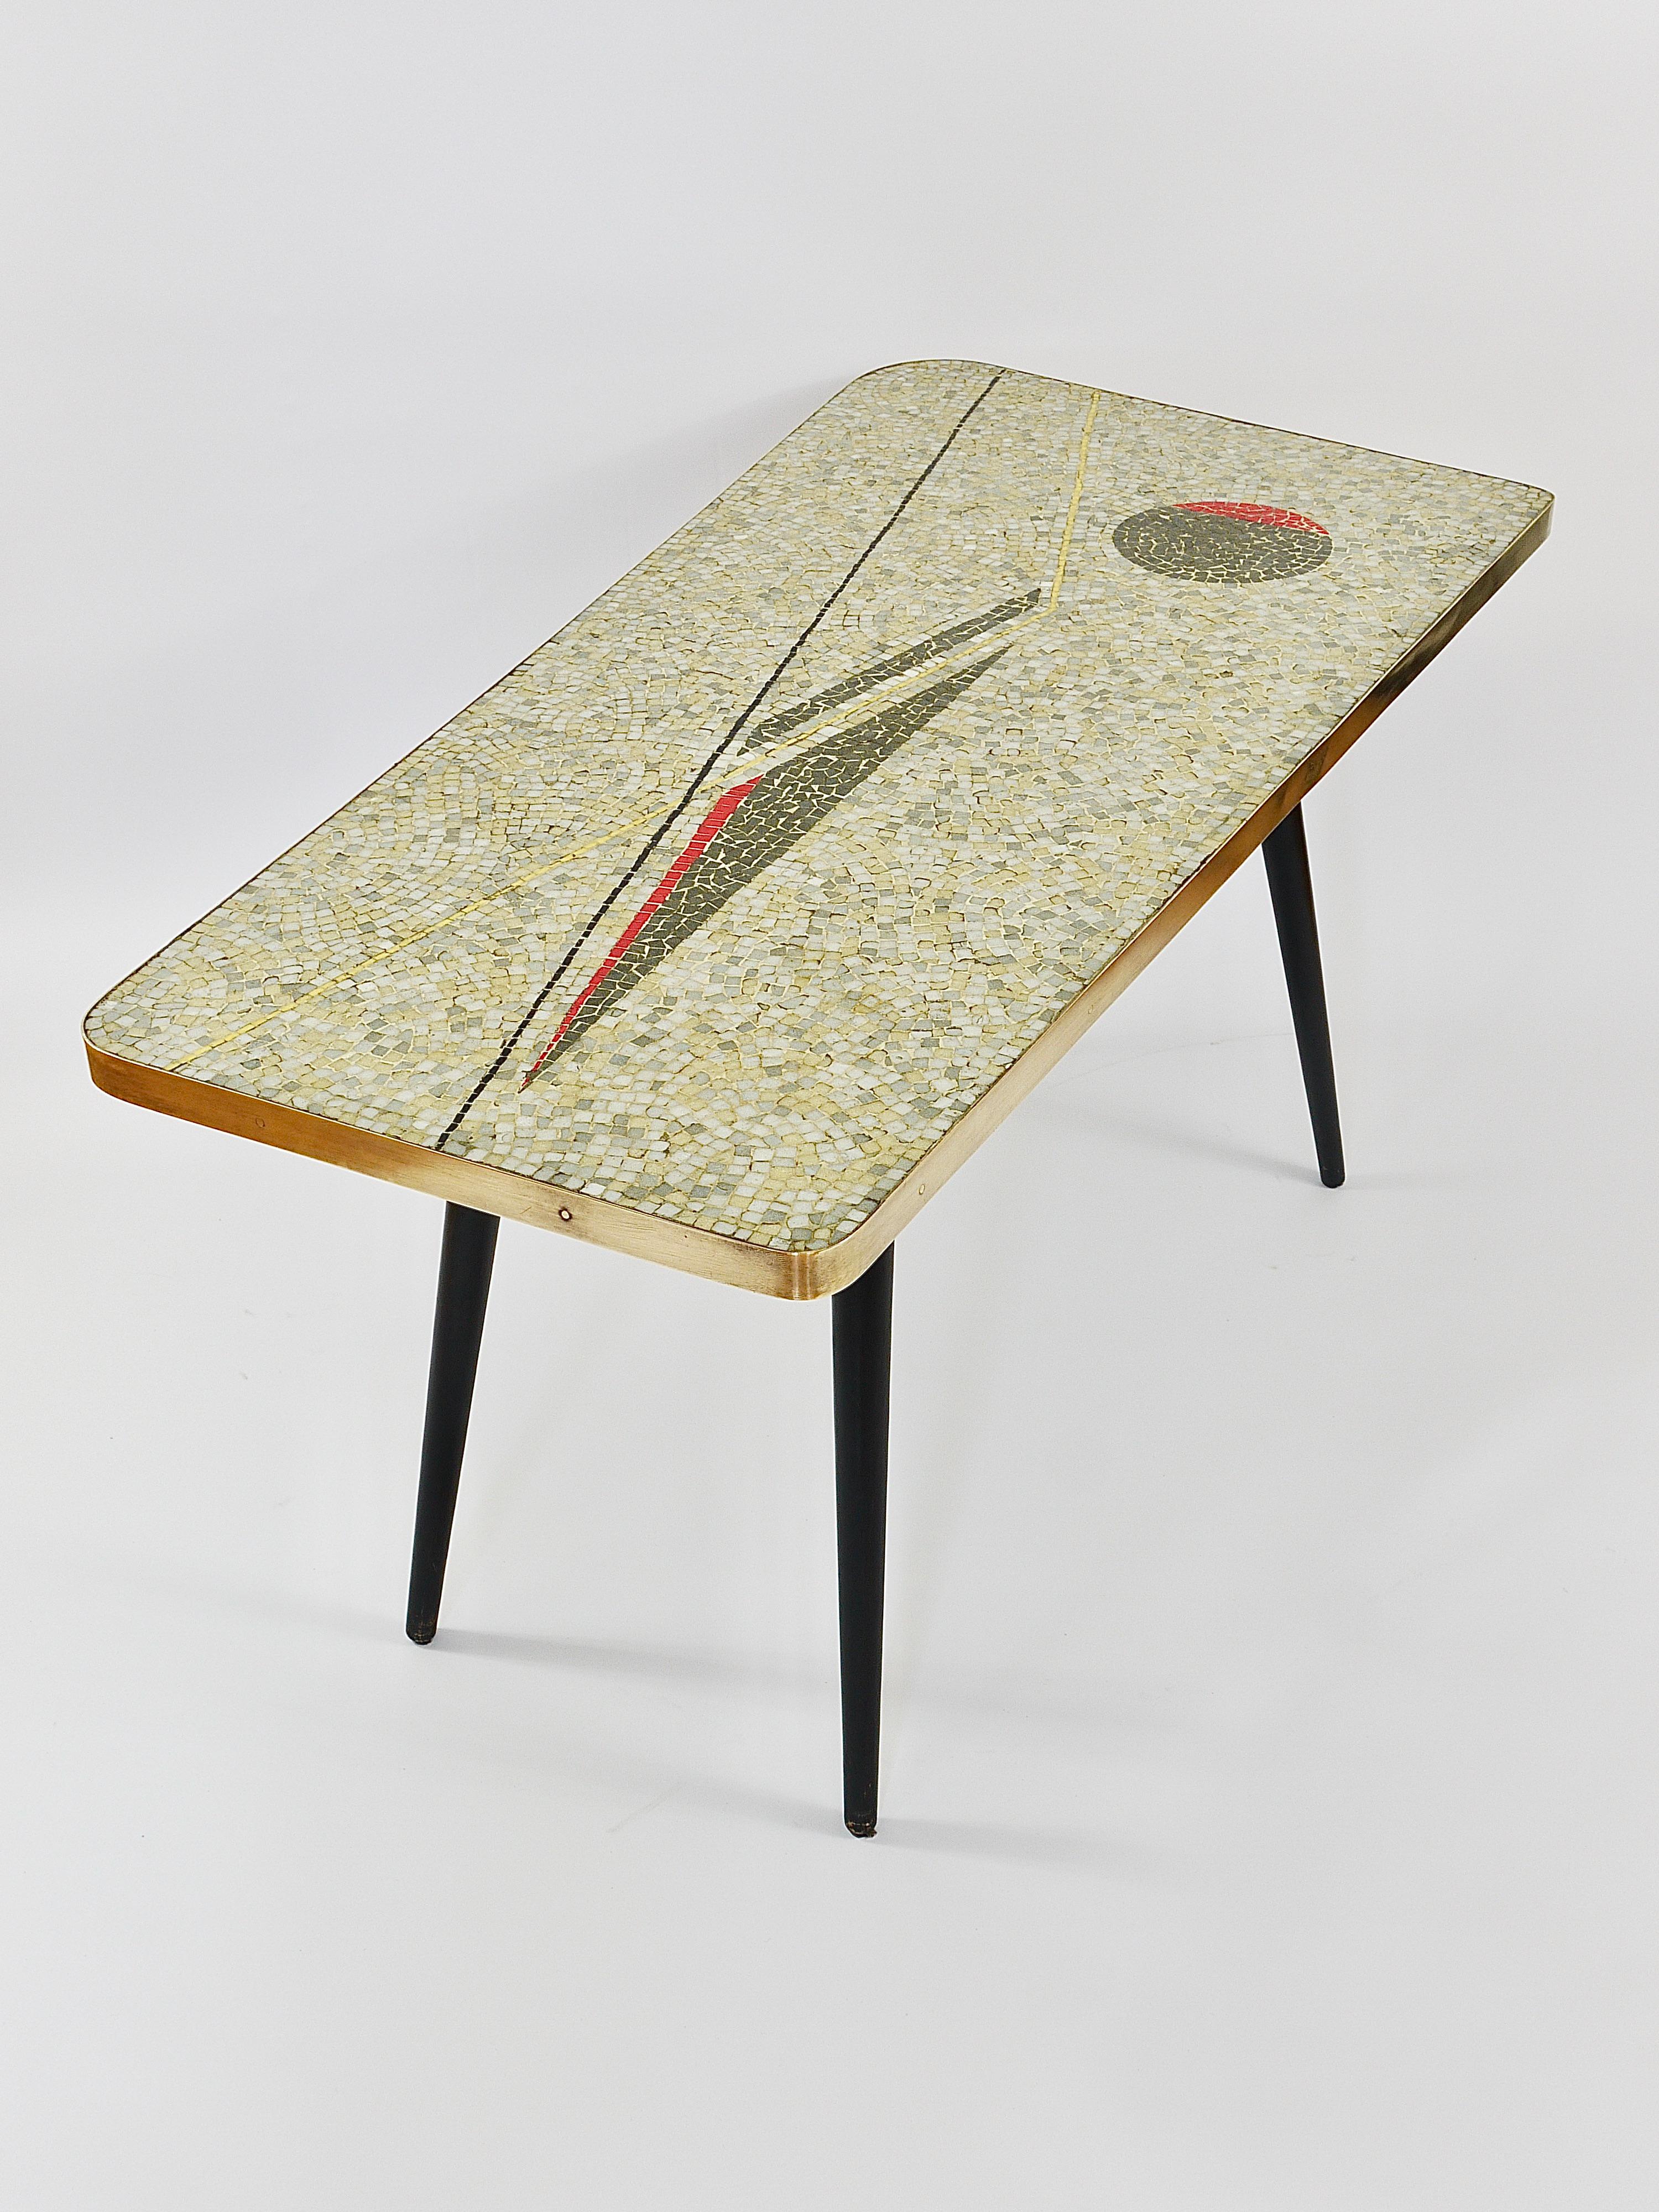 Berthold Muller Asymmetrical Mosaic Tile Coffee or Sofa Table, Germany, 1950s For Sale 6